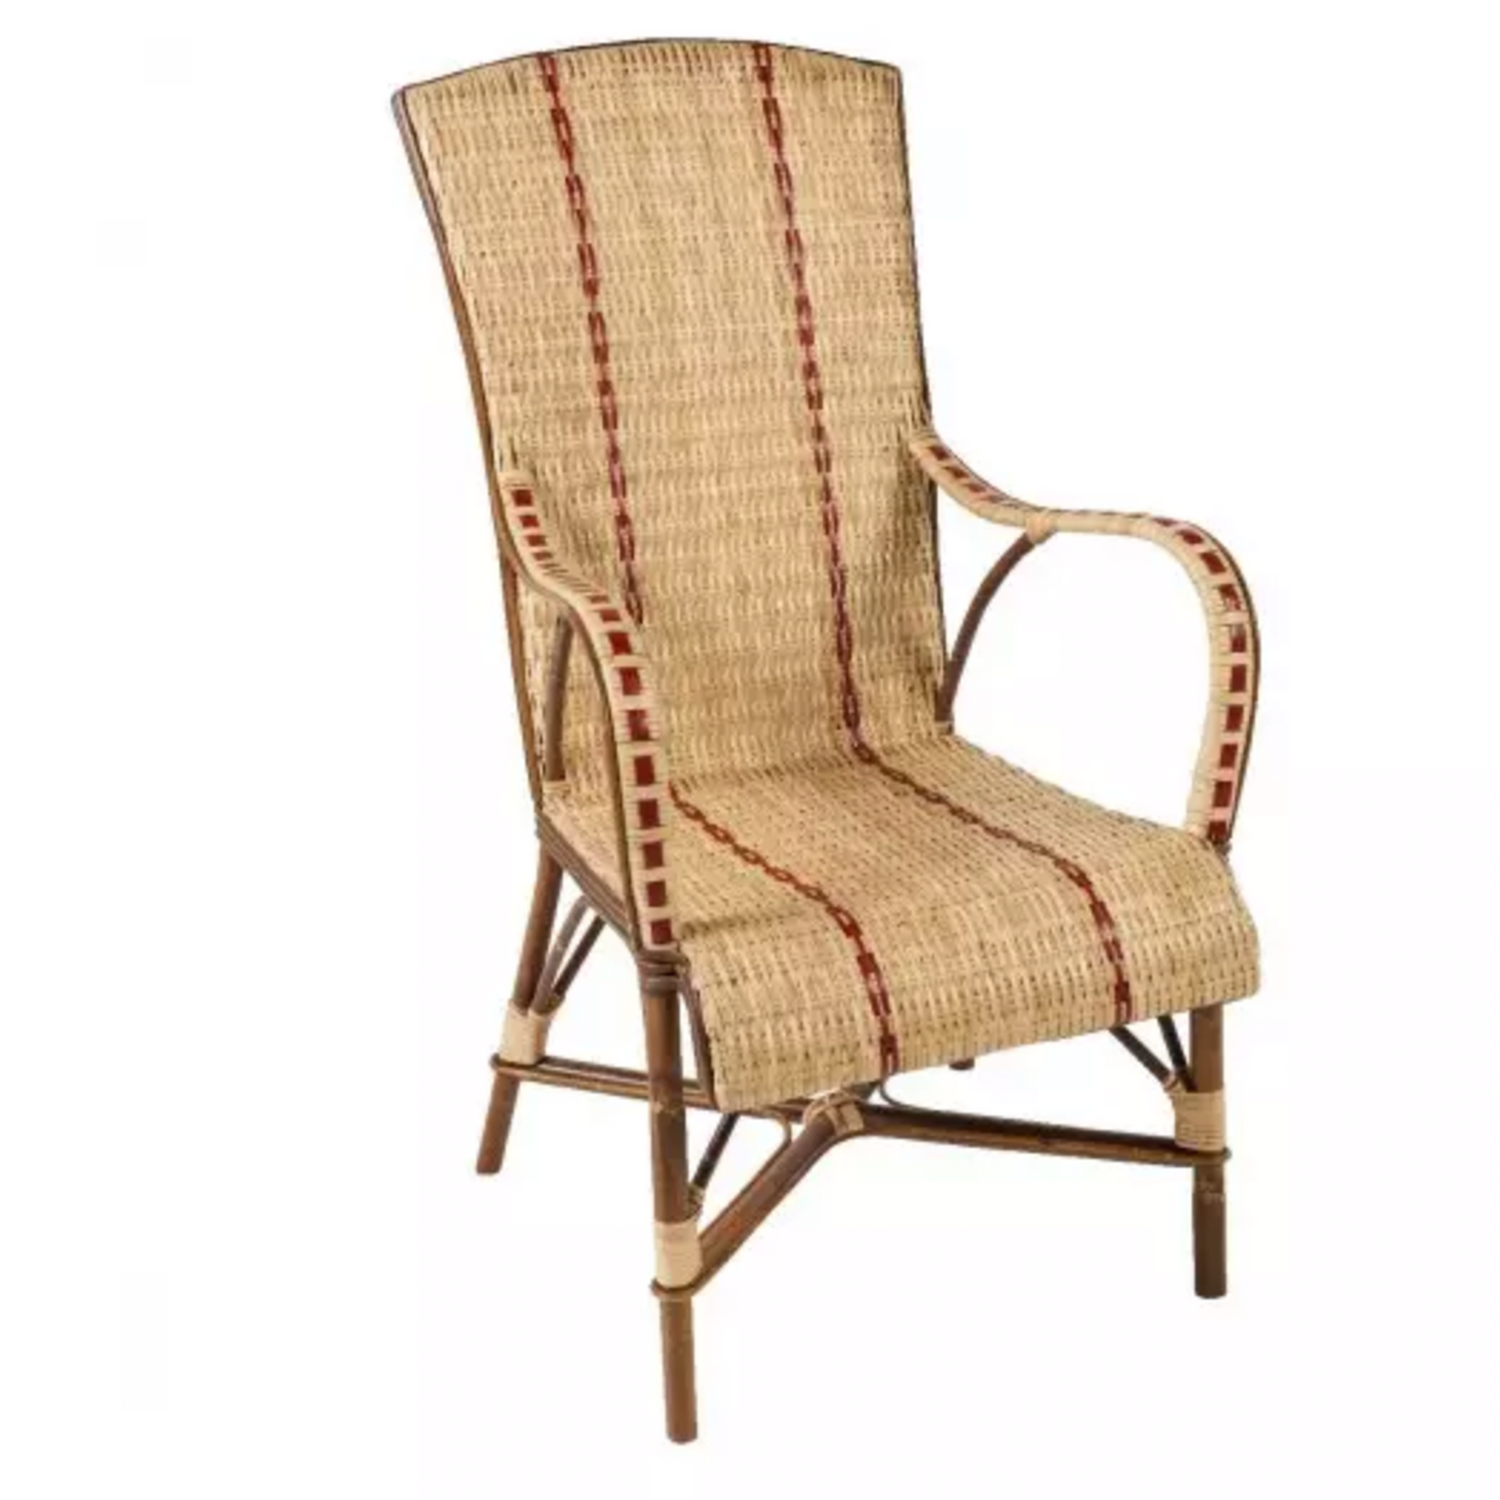 Rattan Bagatelle Armchair with High Backrest